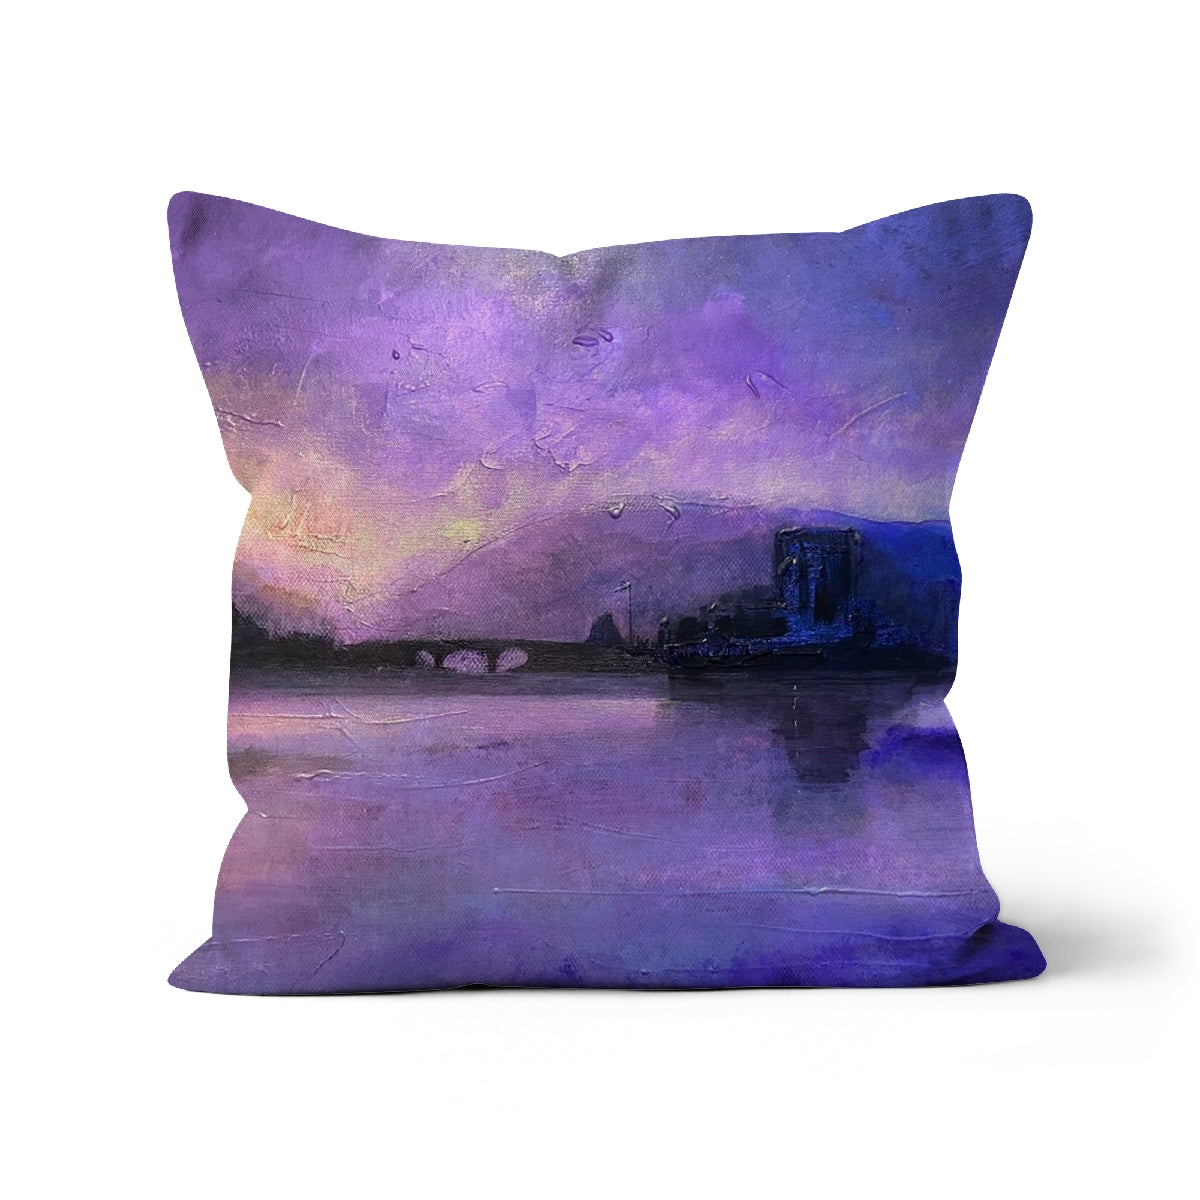 Eilean Donan Castle Moonset Art Gifts Cushion-Cushions-Historic & Iconic Scotland Art Gallery-Canvas-22"x22"-Paintings, Prints, Homeware, Art Gifts From Scotland By Scottish Artist Kevin Hunter